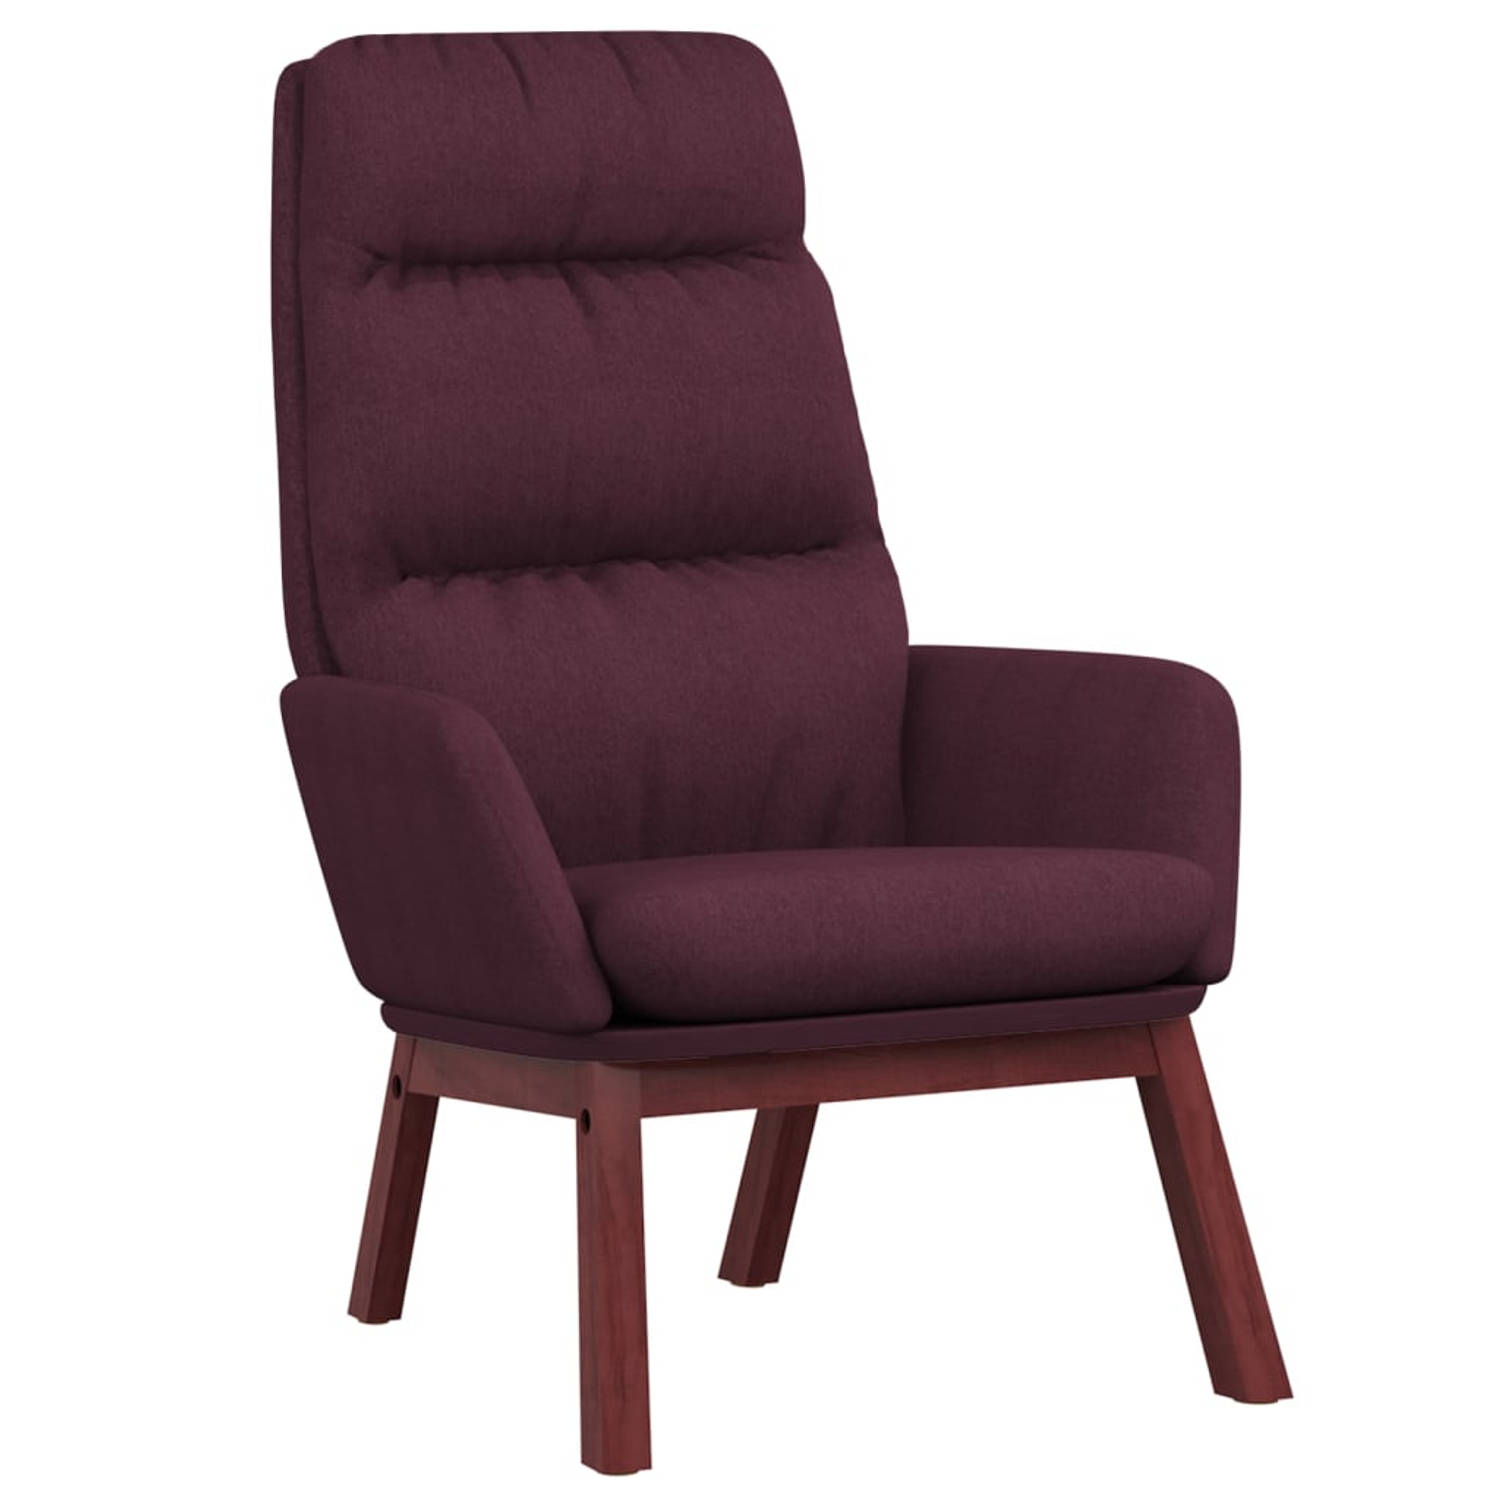 The Living Store Relaxstoel stof paars - Fauteuil